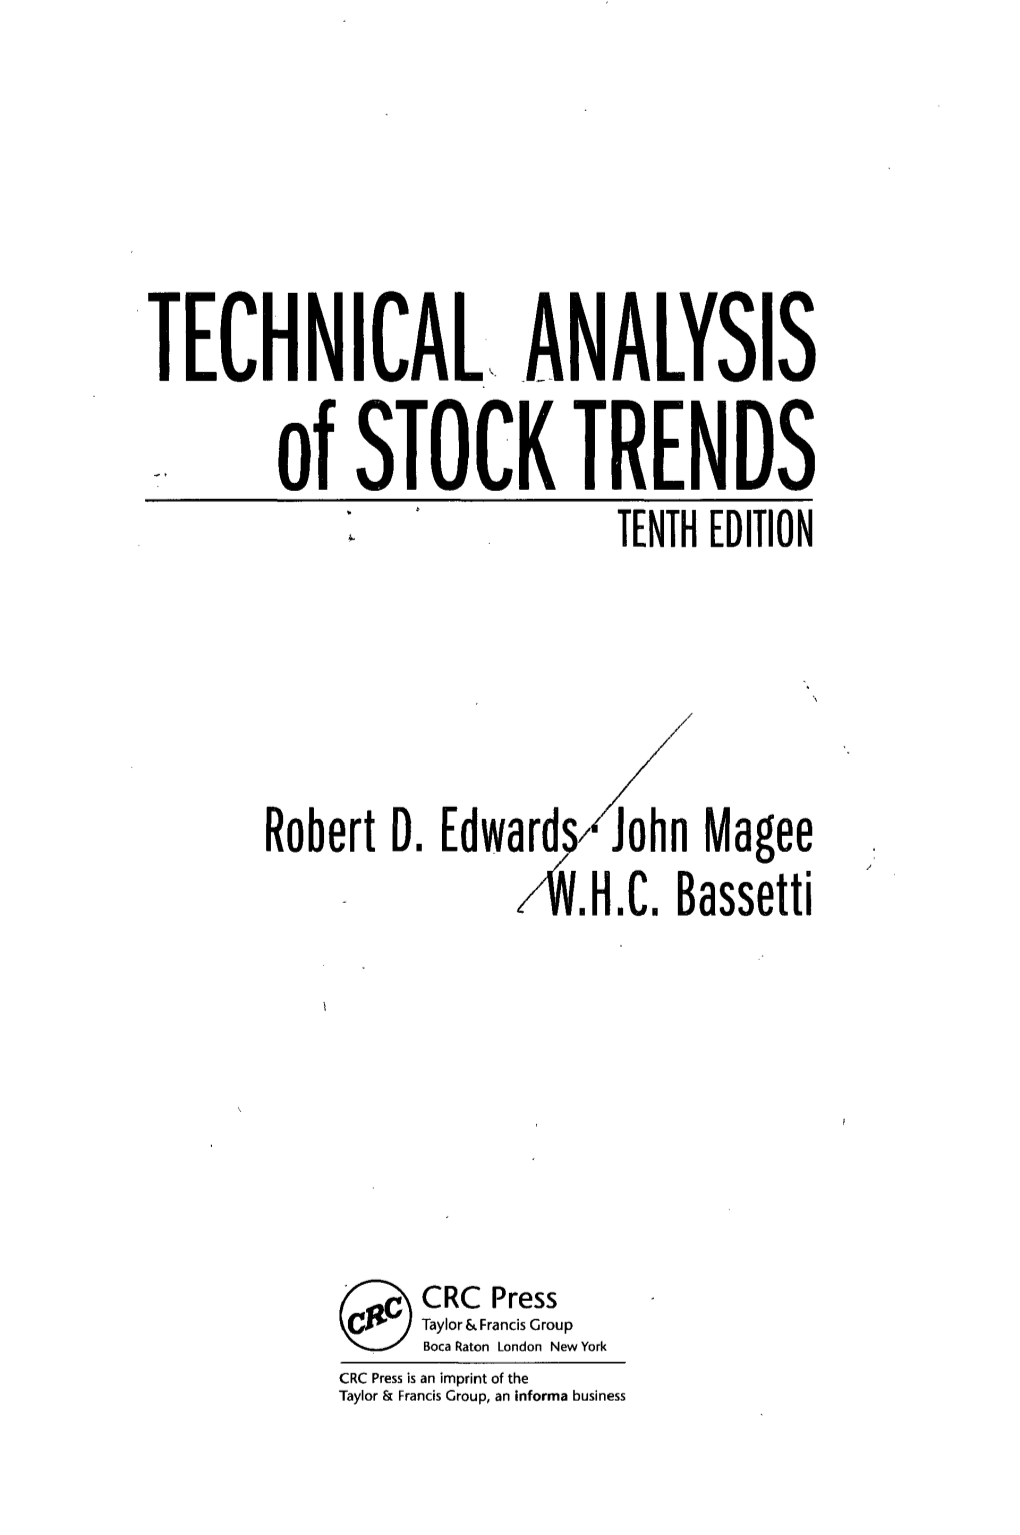 TECHNICAL ANALYSIS of STOCK TRENDS TENTH EDITION